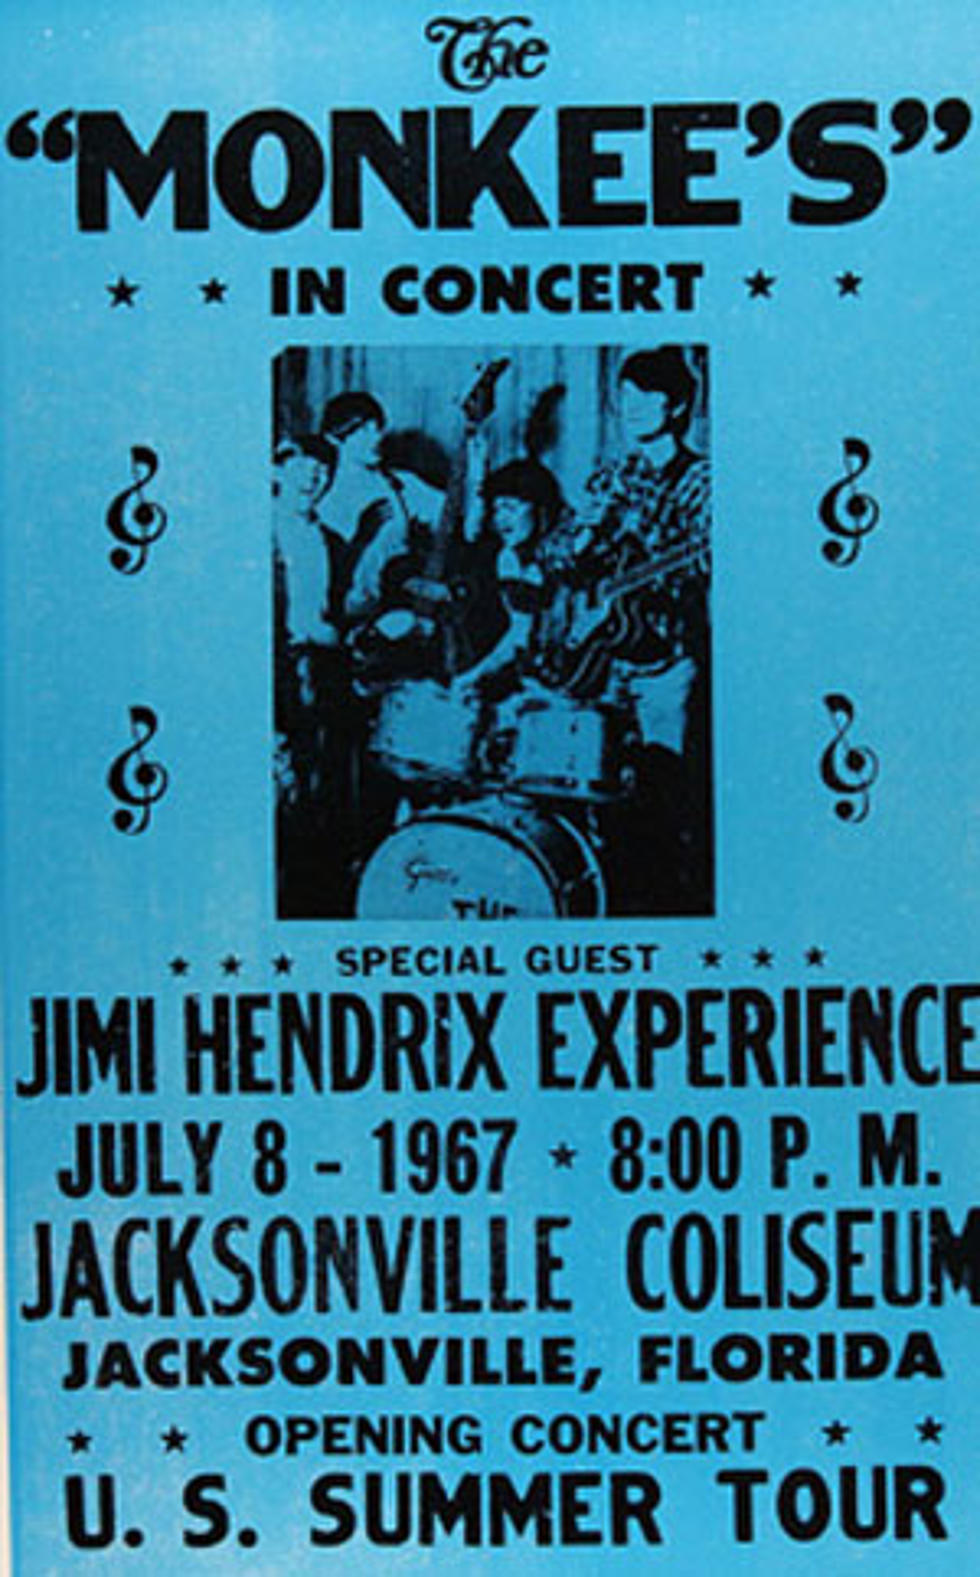 48 Years Ago: Jimi Hendrix Joins the Monkees Tour